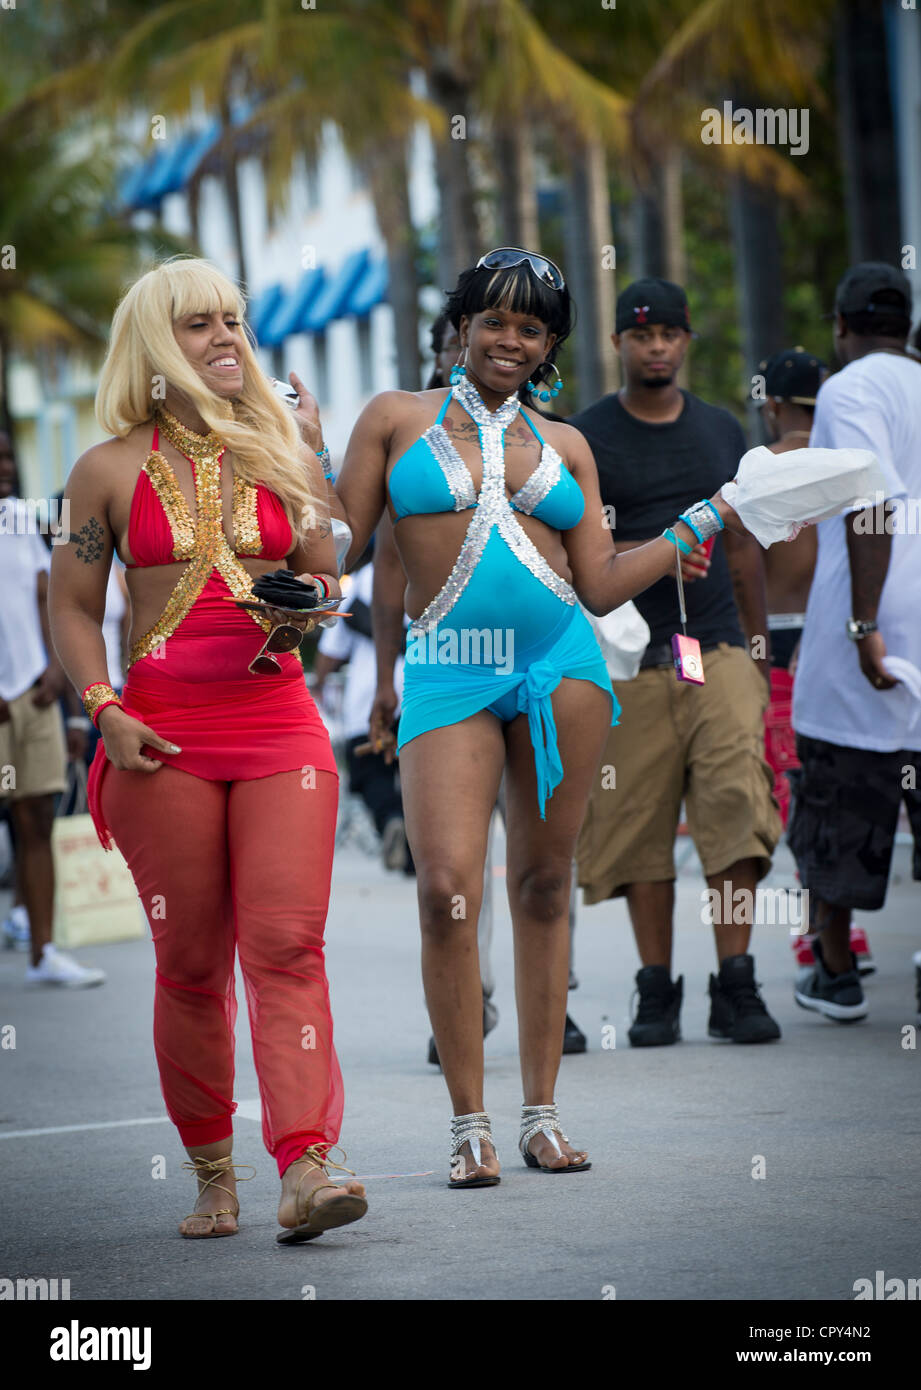 MIAMI - May 26, 2012: Happy girls during the Miami Beach Urban Weekend, this is the largest Urban Festival in the World, that caters towards the Hip Hop Generation. Over 300.000 participants make the annual trek to South Beach for 4 days full of fun, food, festivities, entertainment, music, and more. Stock Photo